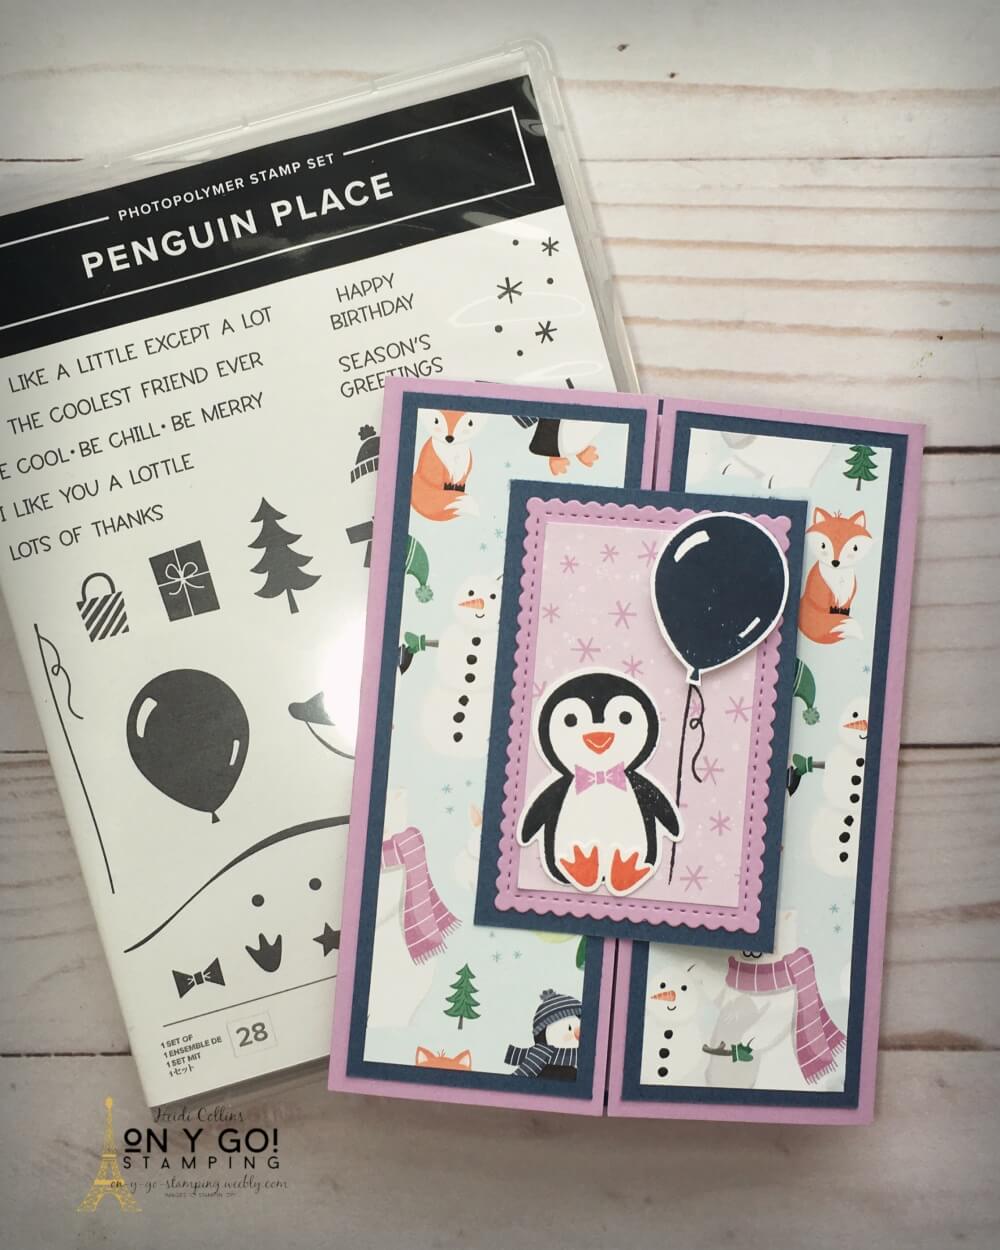 Fun fold card idea with the NEW Penguin Place stamp set from the August-December Mini Catalog from Stampin' Up! This shutter card also uses the Penguin Playmates patterned paper that you can get FREE during the Fall 2021 Sale-A-Bration!